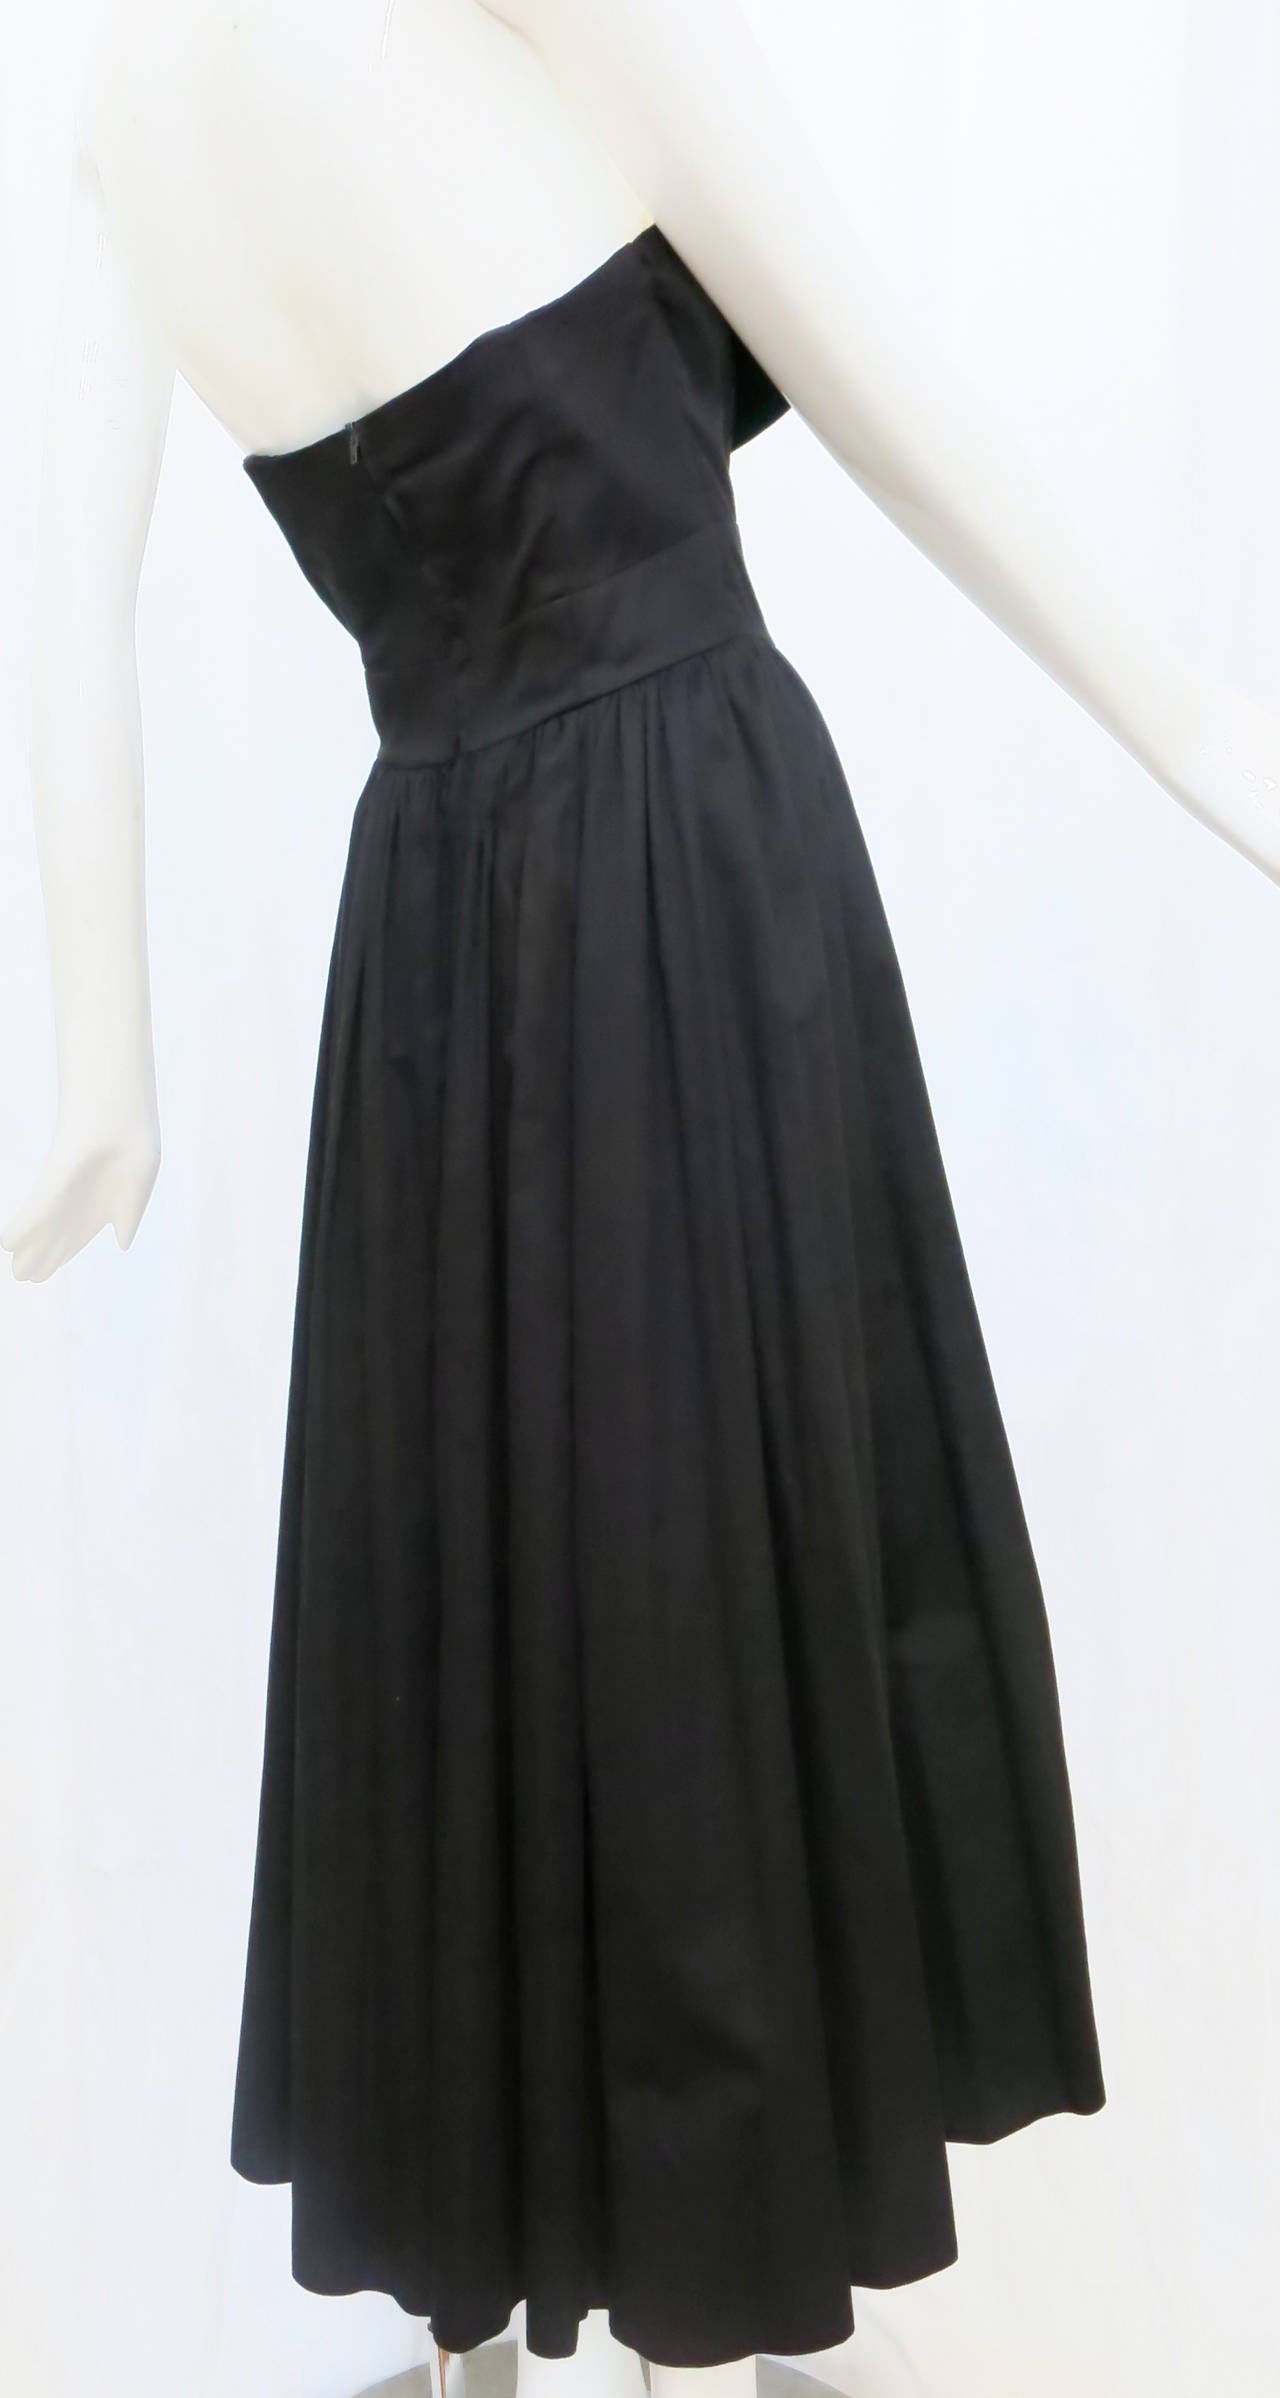 A departure from Laura Ashley's signature pastel palette and floral patterns, this cool cotton strapless black dress unfolds at the bust to reveal a warm marigold panel, making it suitable for day or evening wear. Made in Hungary.

*Please contact